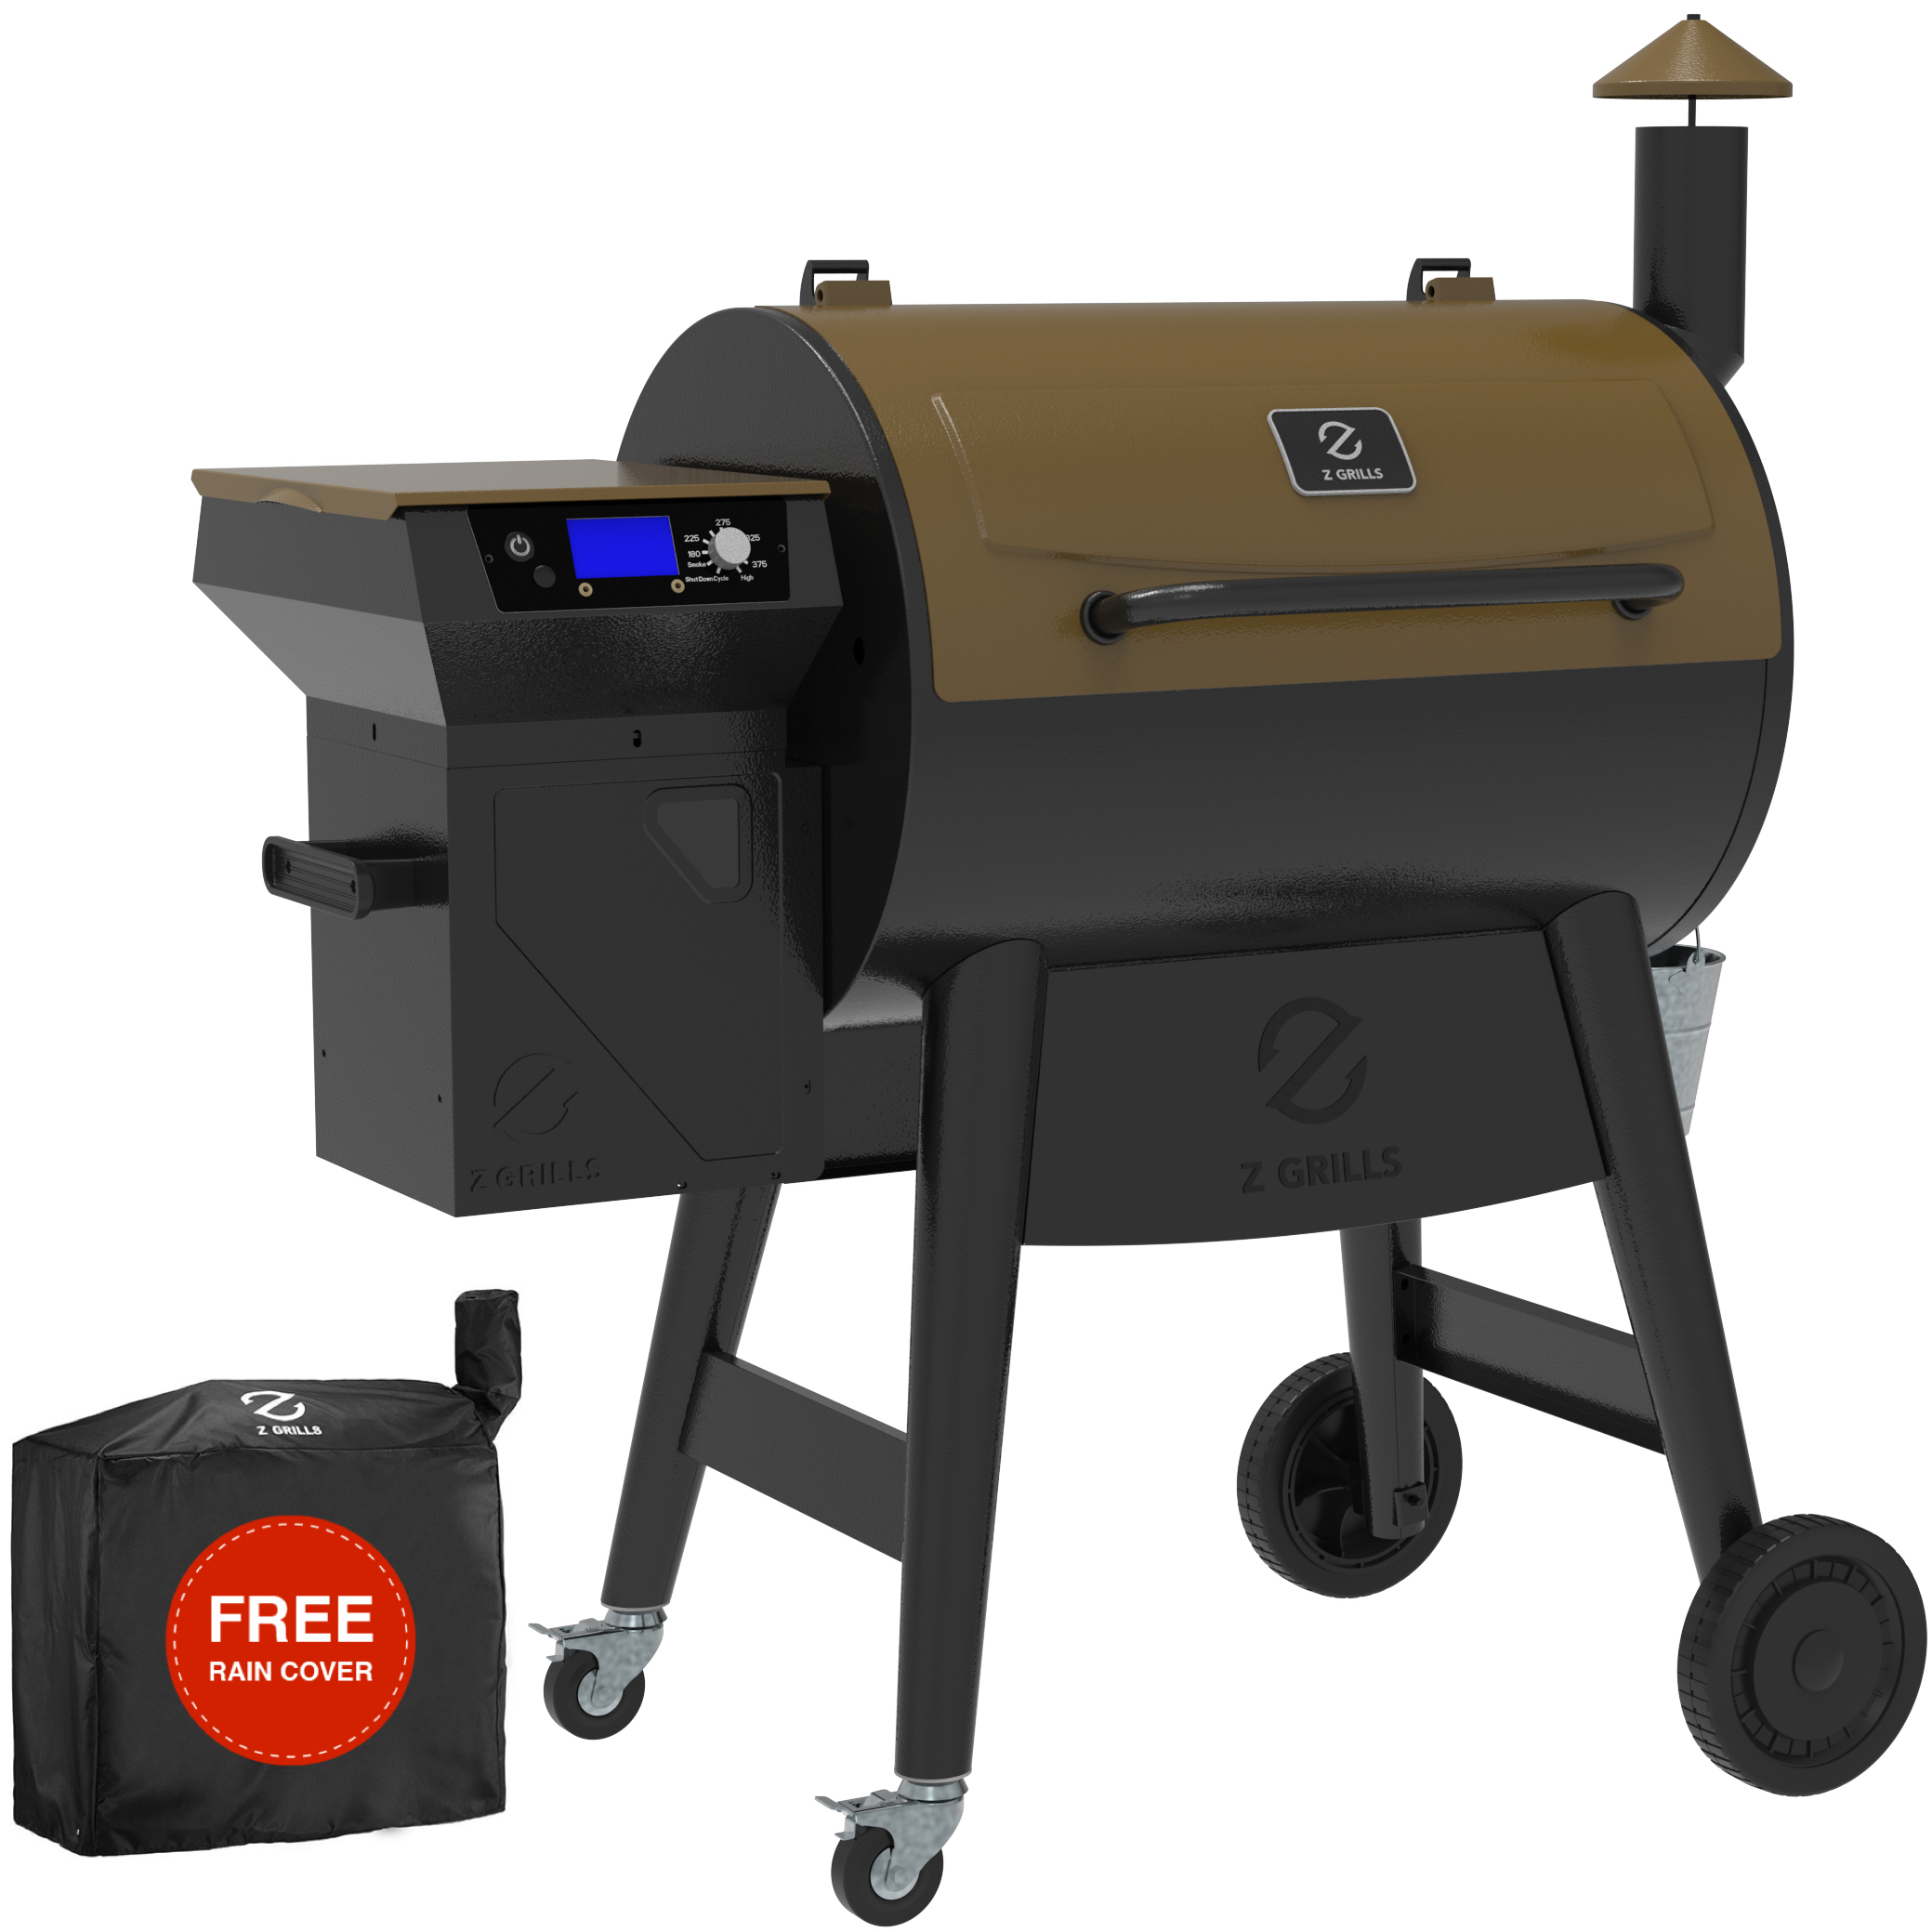 Z GRILLS ZPG-7002C3E 694 sq. in. Wood Pellet Grill and Smoker 8-in-1 BBQ Bronze - image 1 of 10